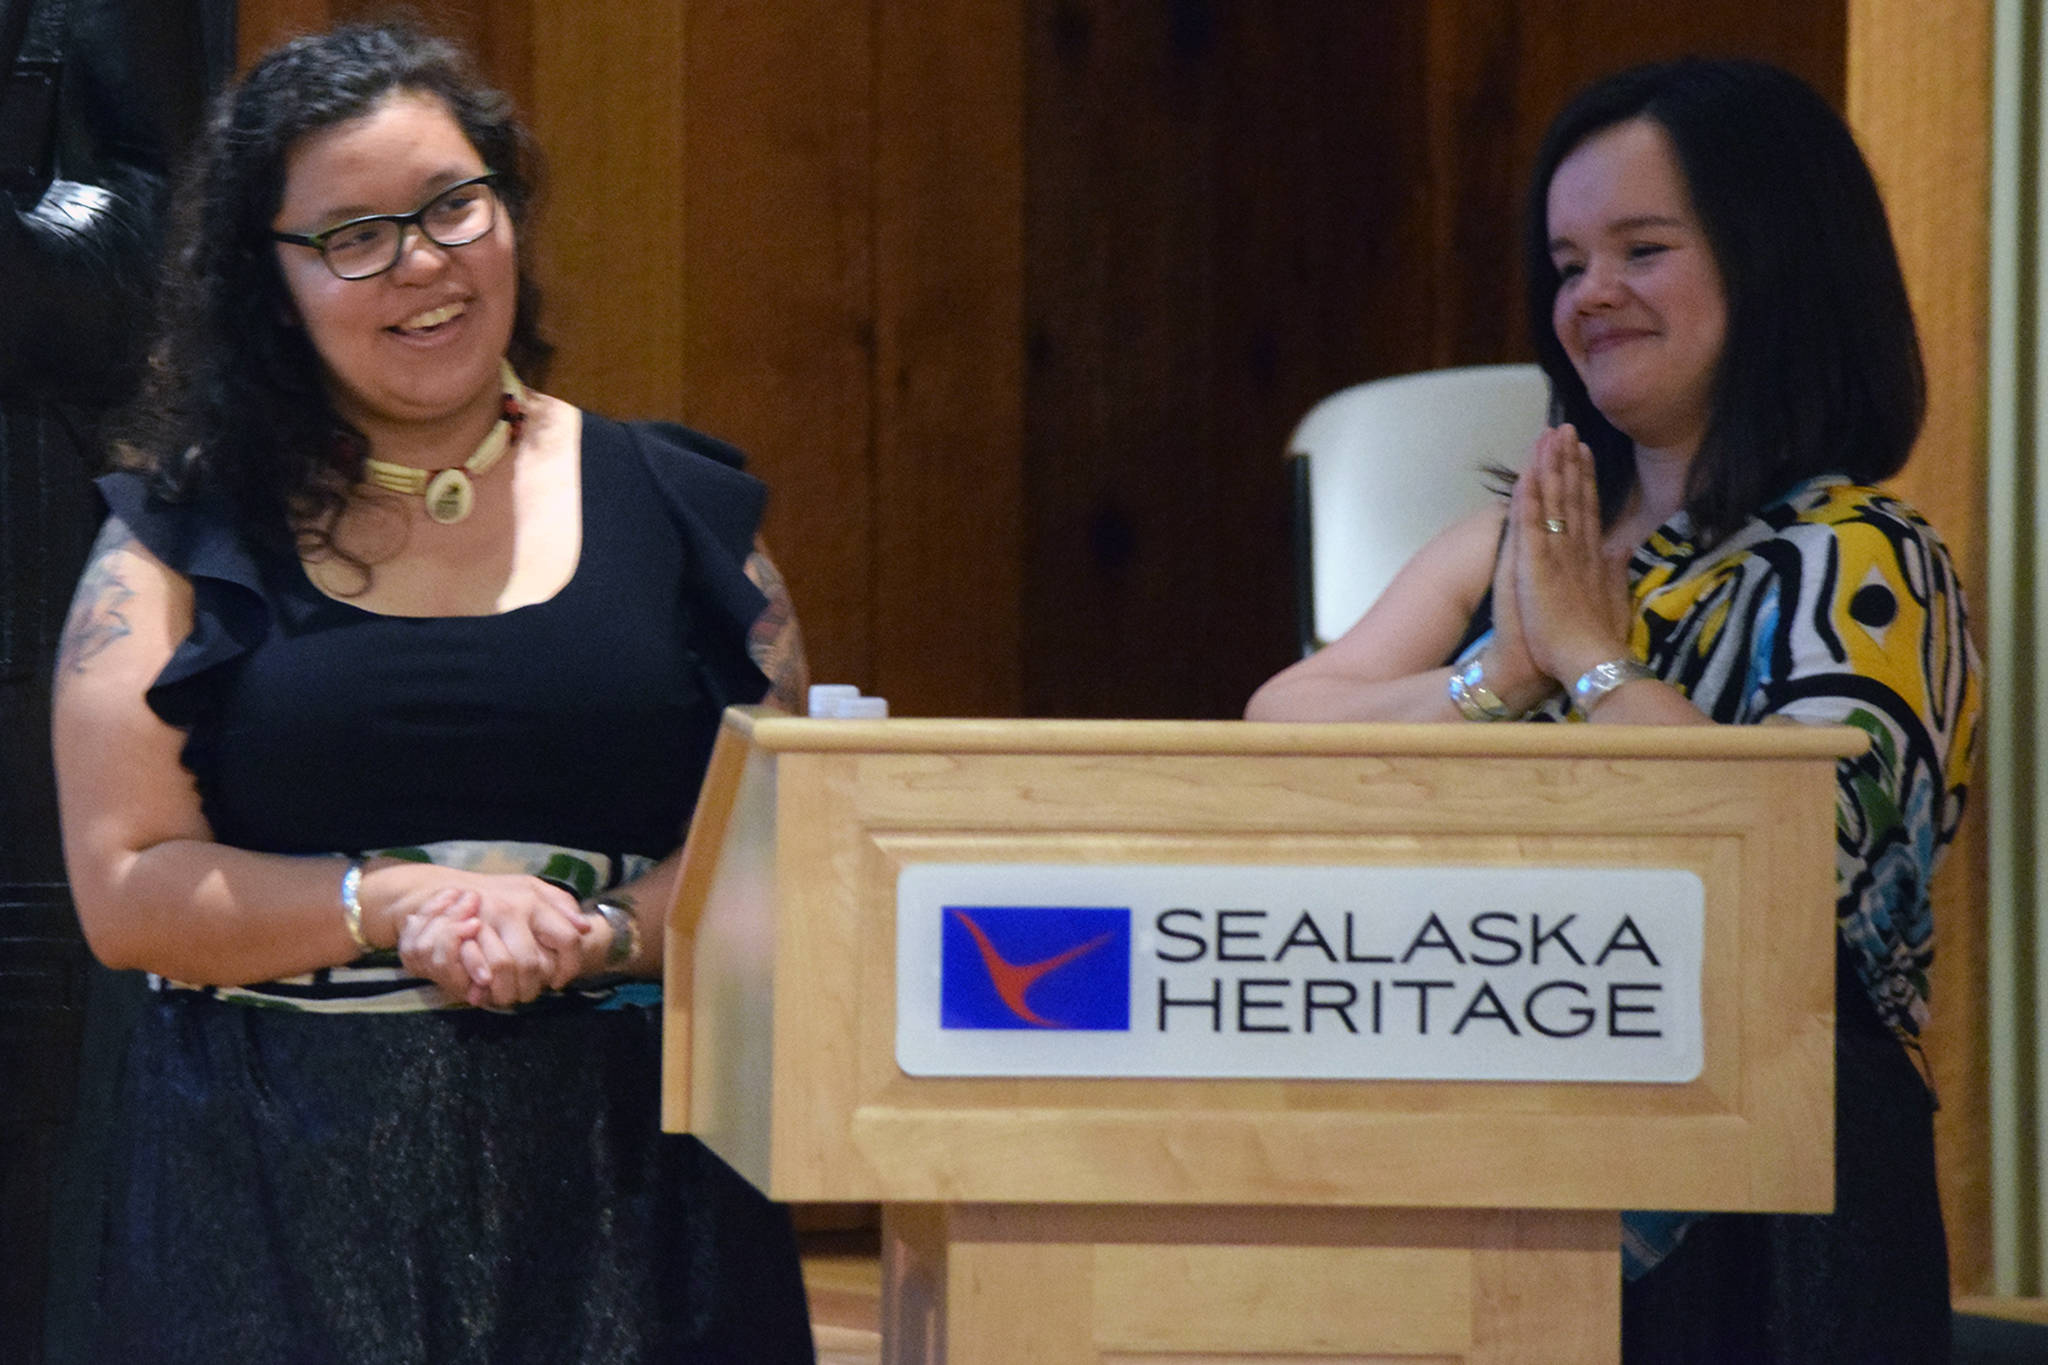 Tlingit weavers Anastasia Shaawaat Ku Gei Hobson-George and Lily Hope talk about a pair of Chilkat dance leggings they made during the “Our Grandmothers’ Wealth” presentation Friday, May 31, 2019. The event was an introduction of a new piece of art and a close to Hobson-George’s apprenticeship. (Ben Hohenstatt | Juneau Empire)